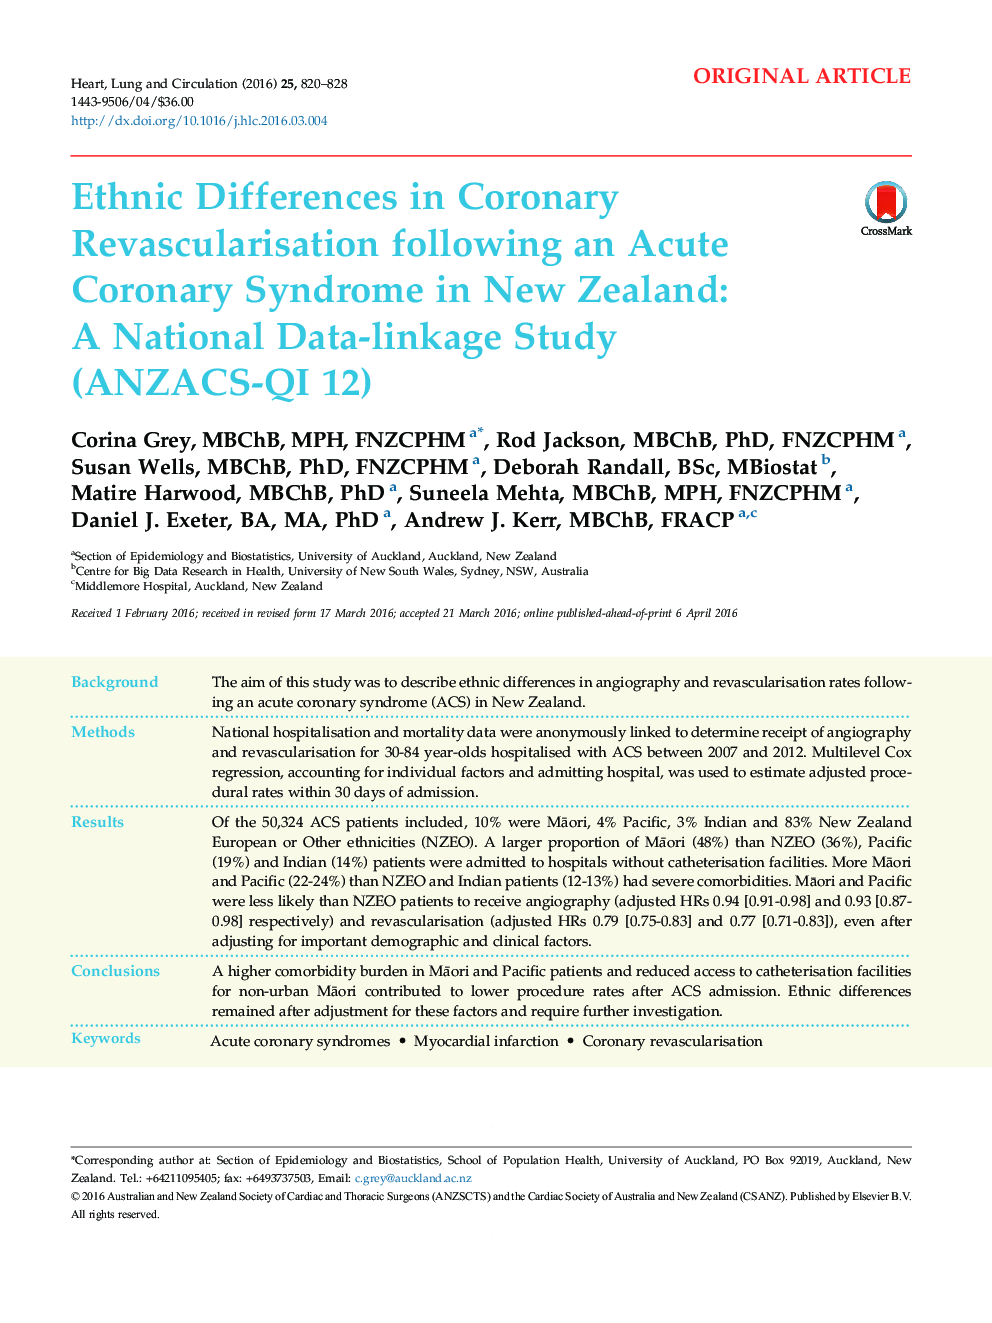 Ethnic Differences in Coronary Revascularisation following an Acute Coronary Syndrome in New Zealand: A National Data-linkage Study (ANZACS-QI 12)